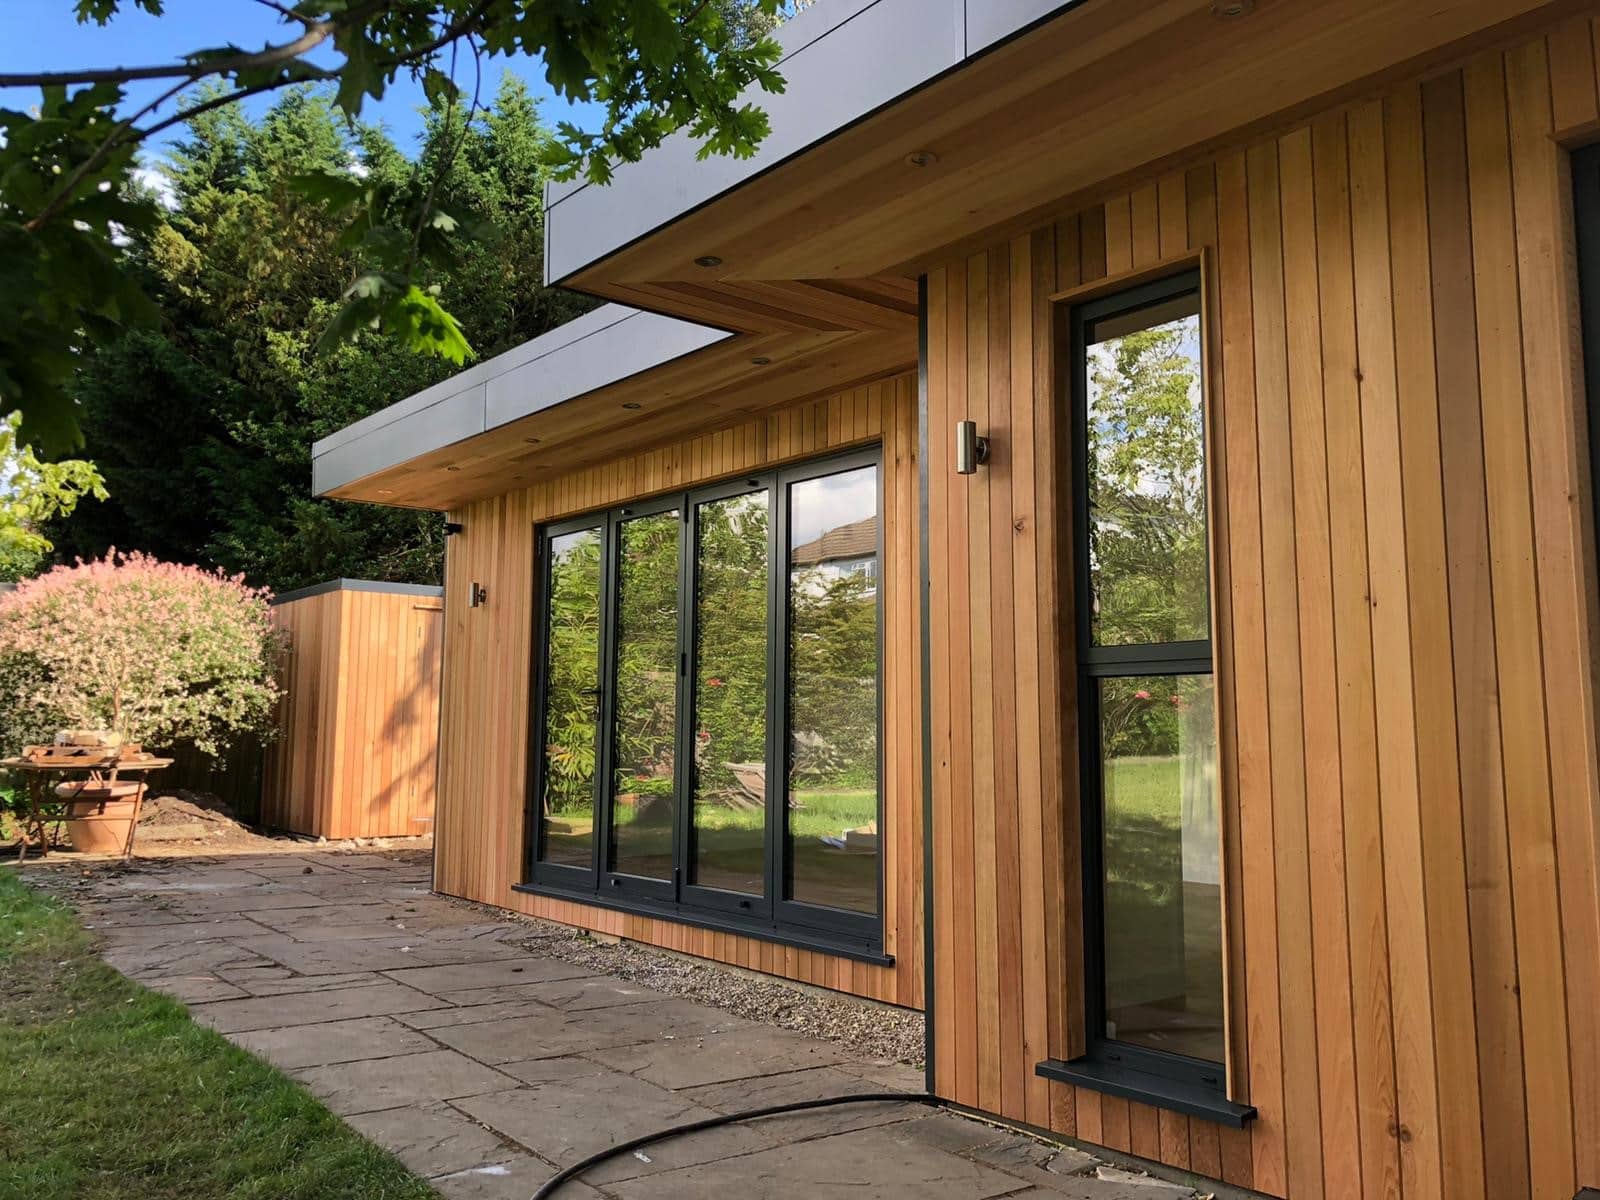 Do I need planning permission for a garden room?